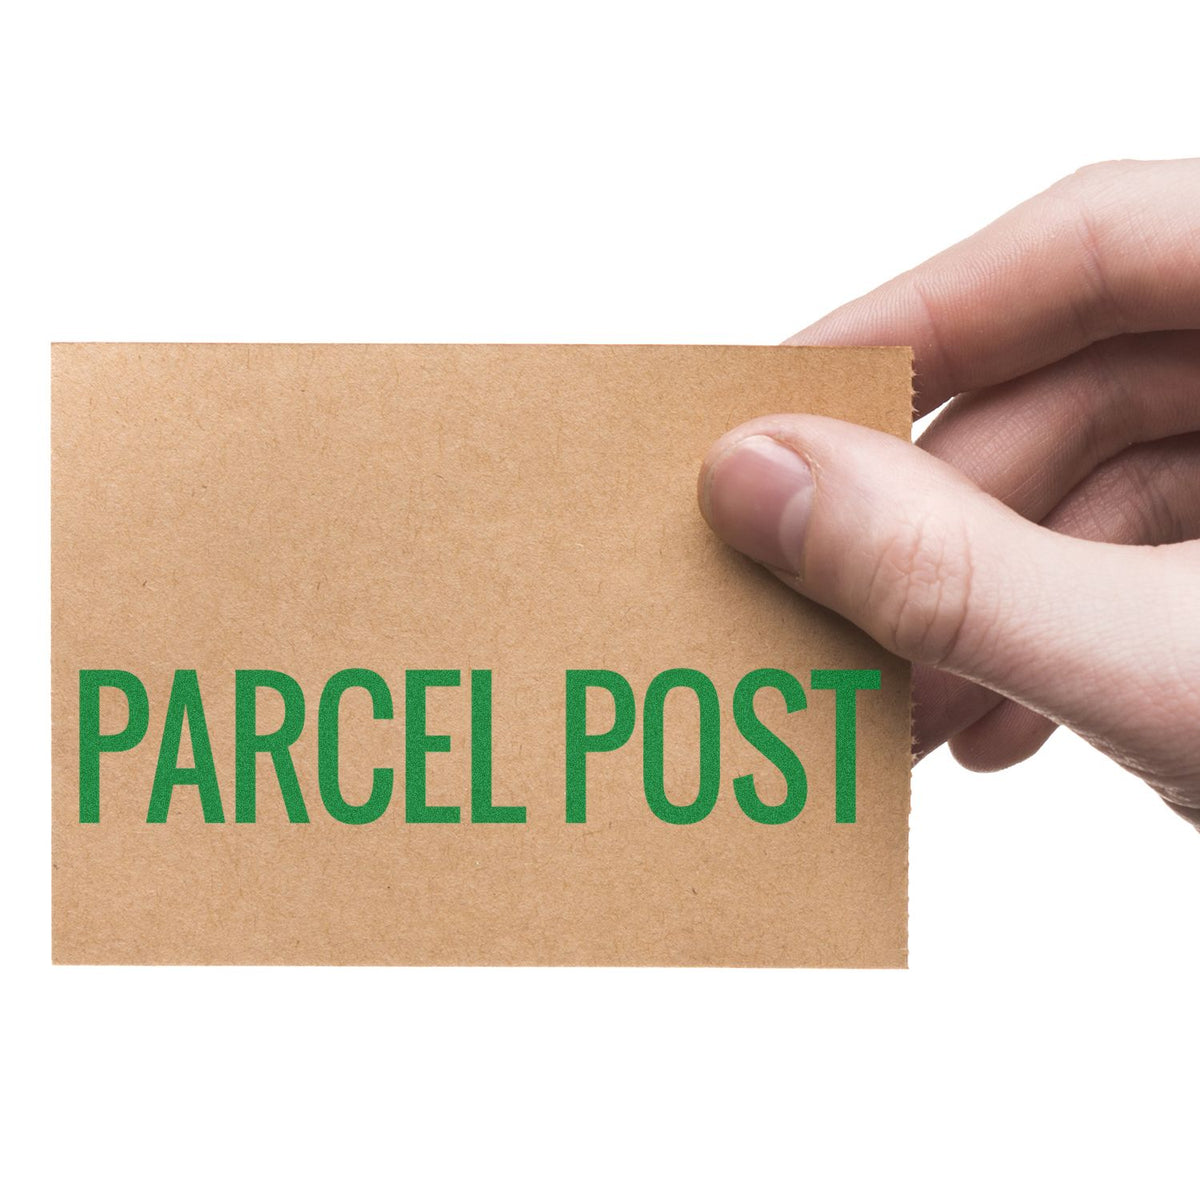 Large Parcel Post Rubber Stamp In Use